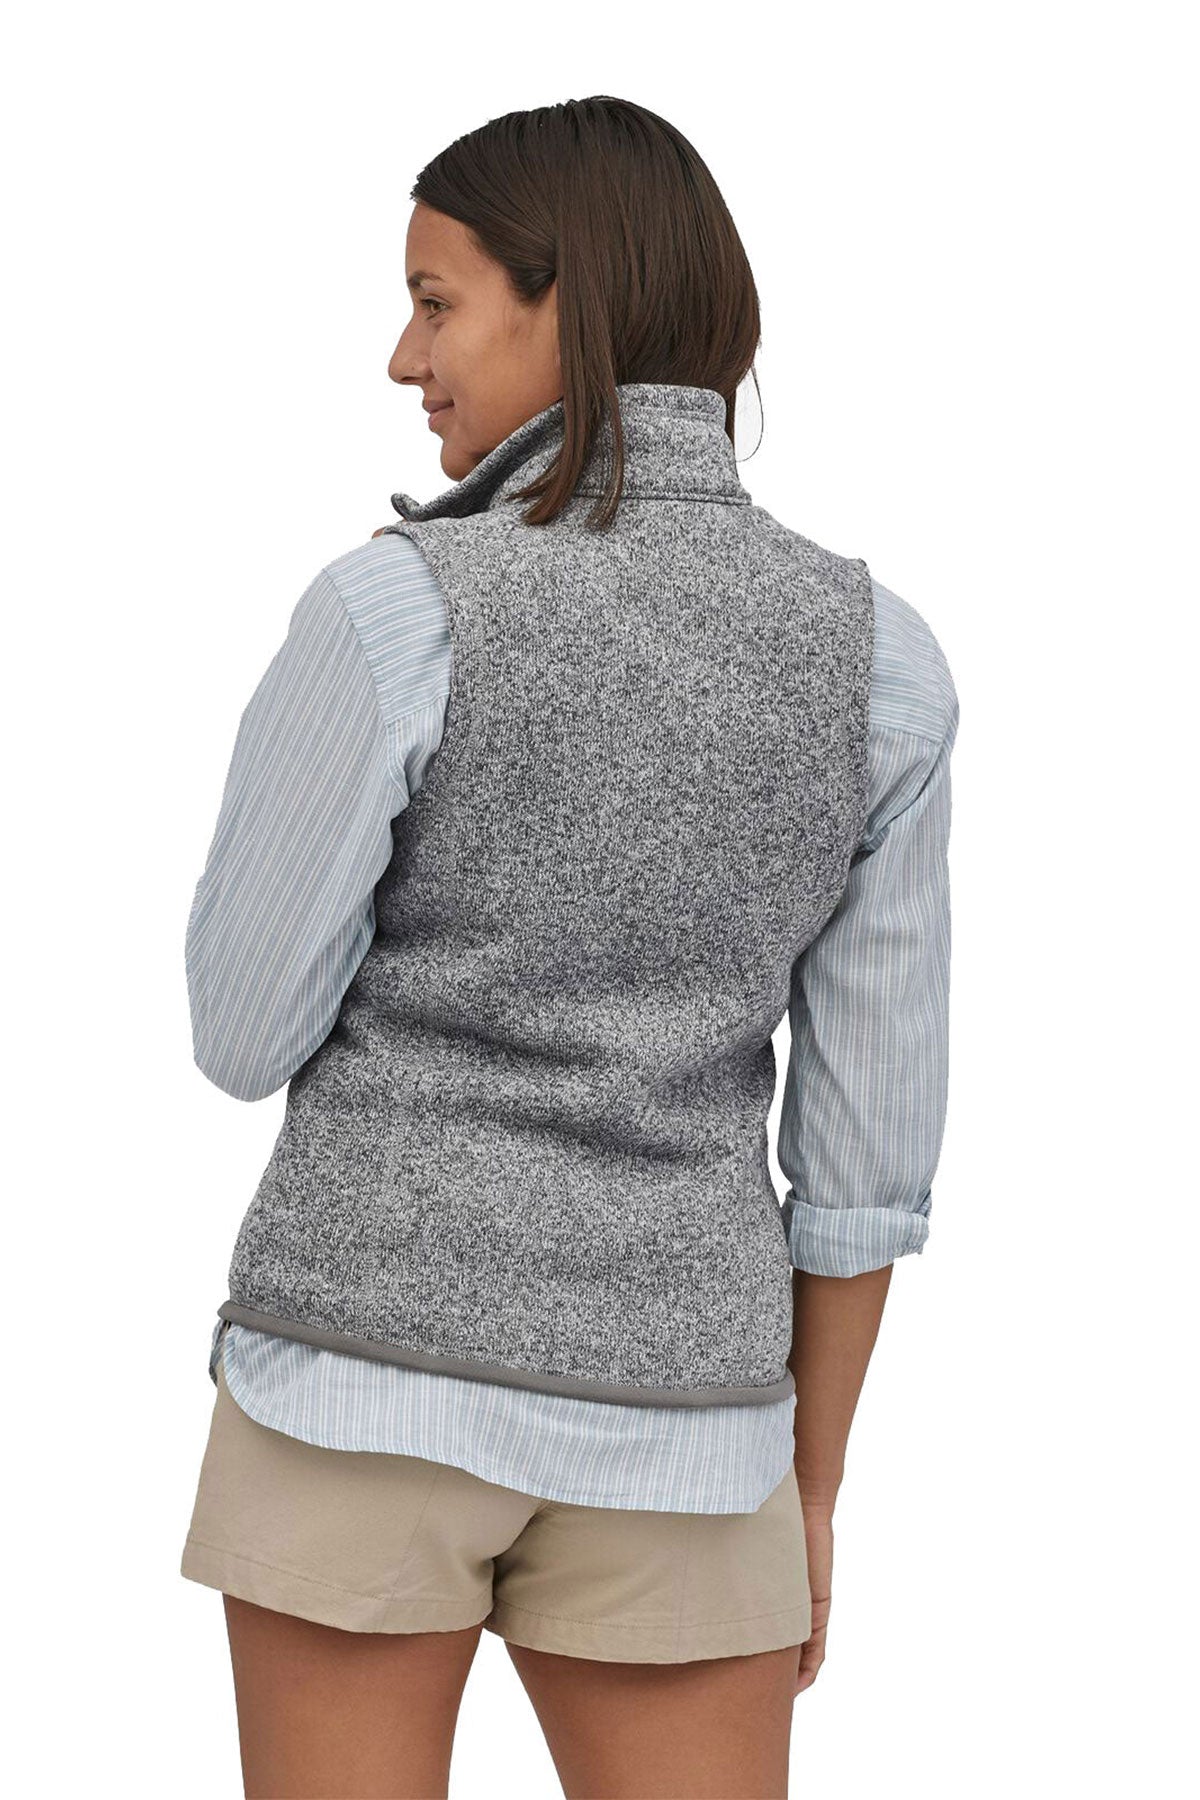 Patagonia Womens Better Sweater Fleece Customized Vests, Birch White